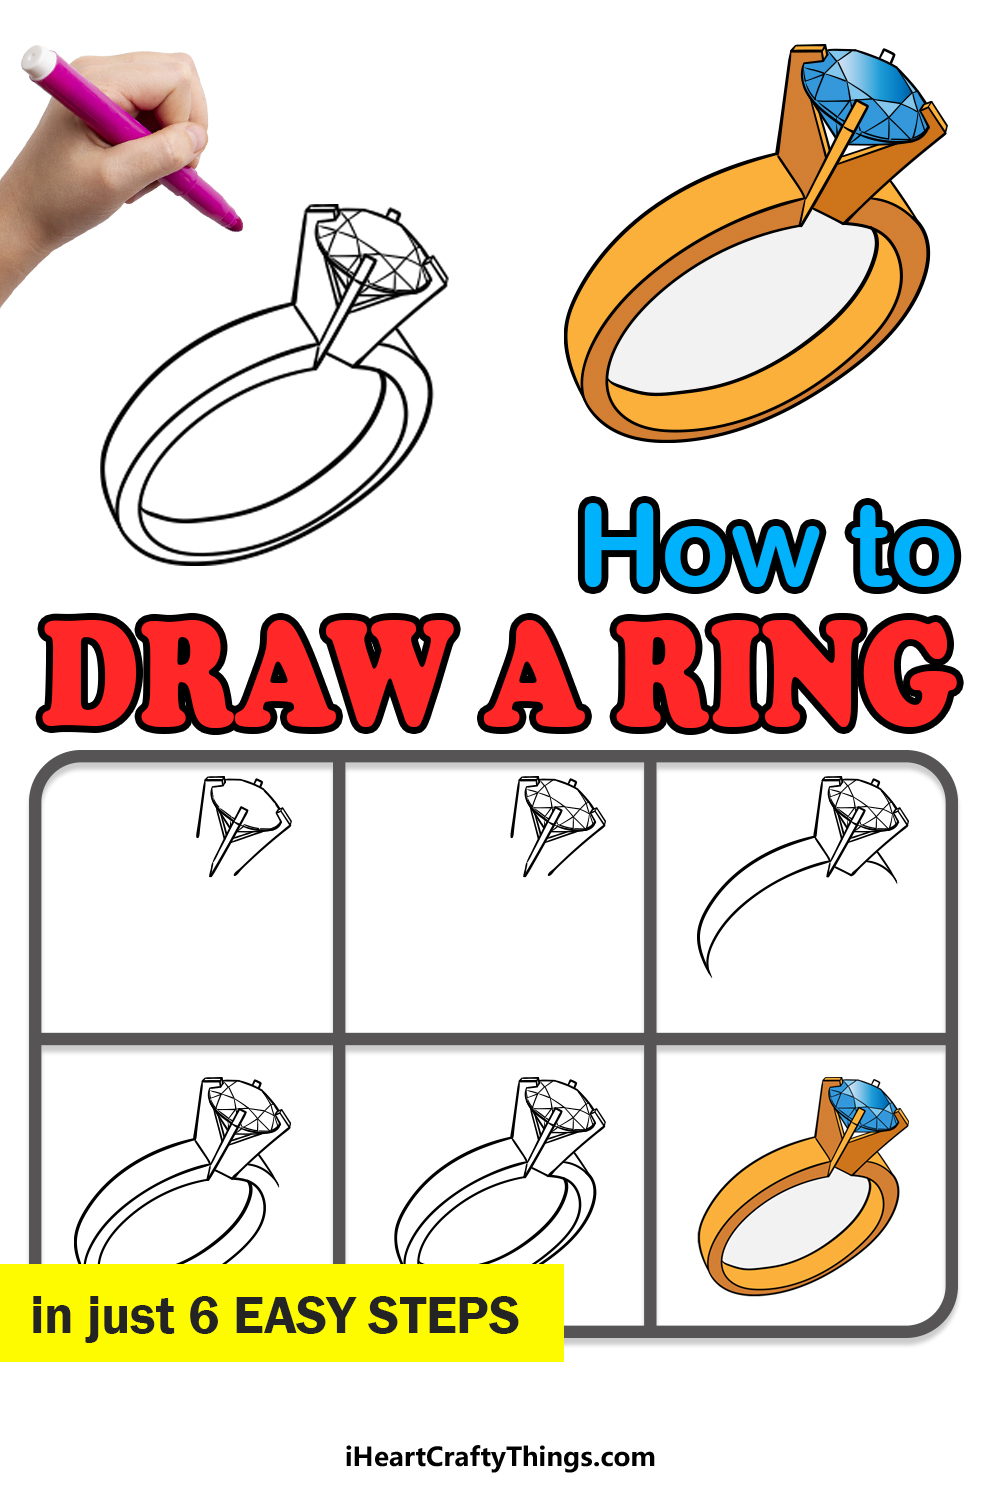 how to draw a ring in 6 easy steps